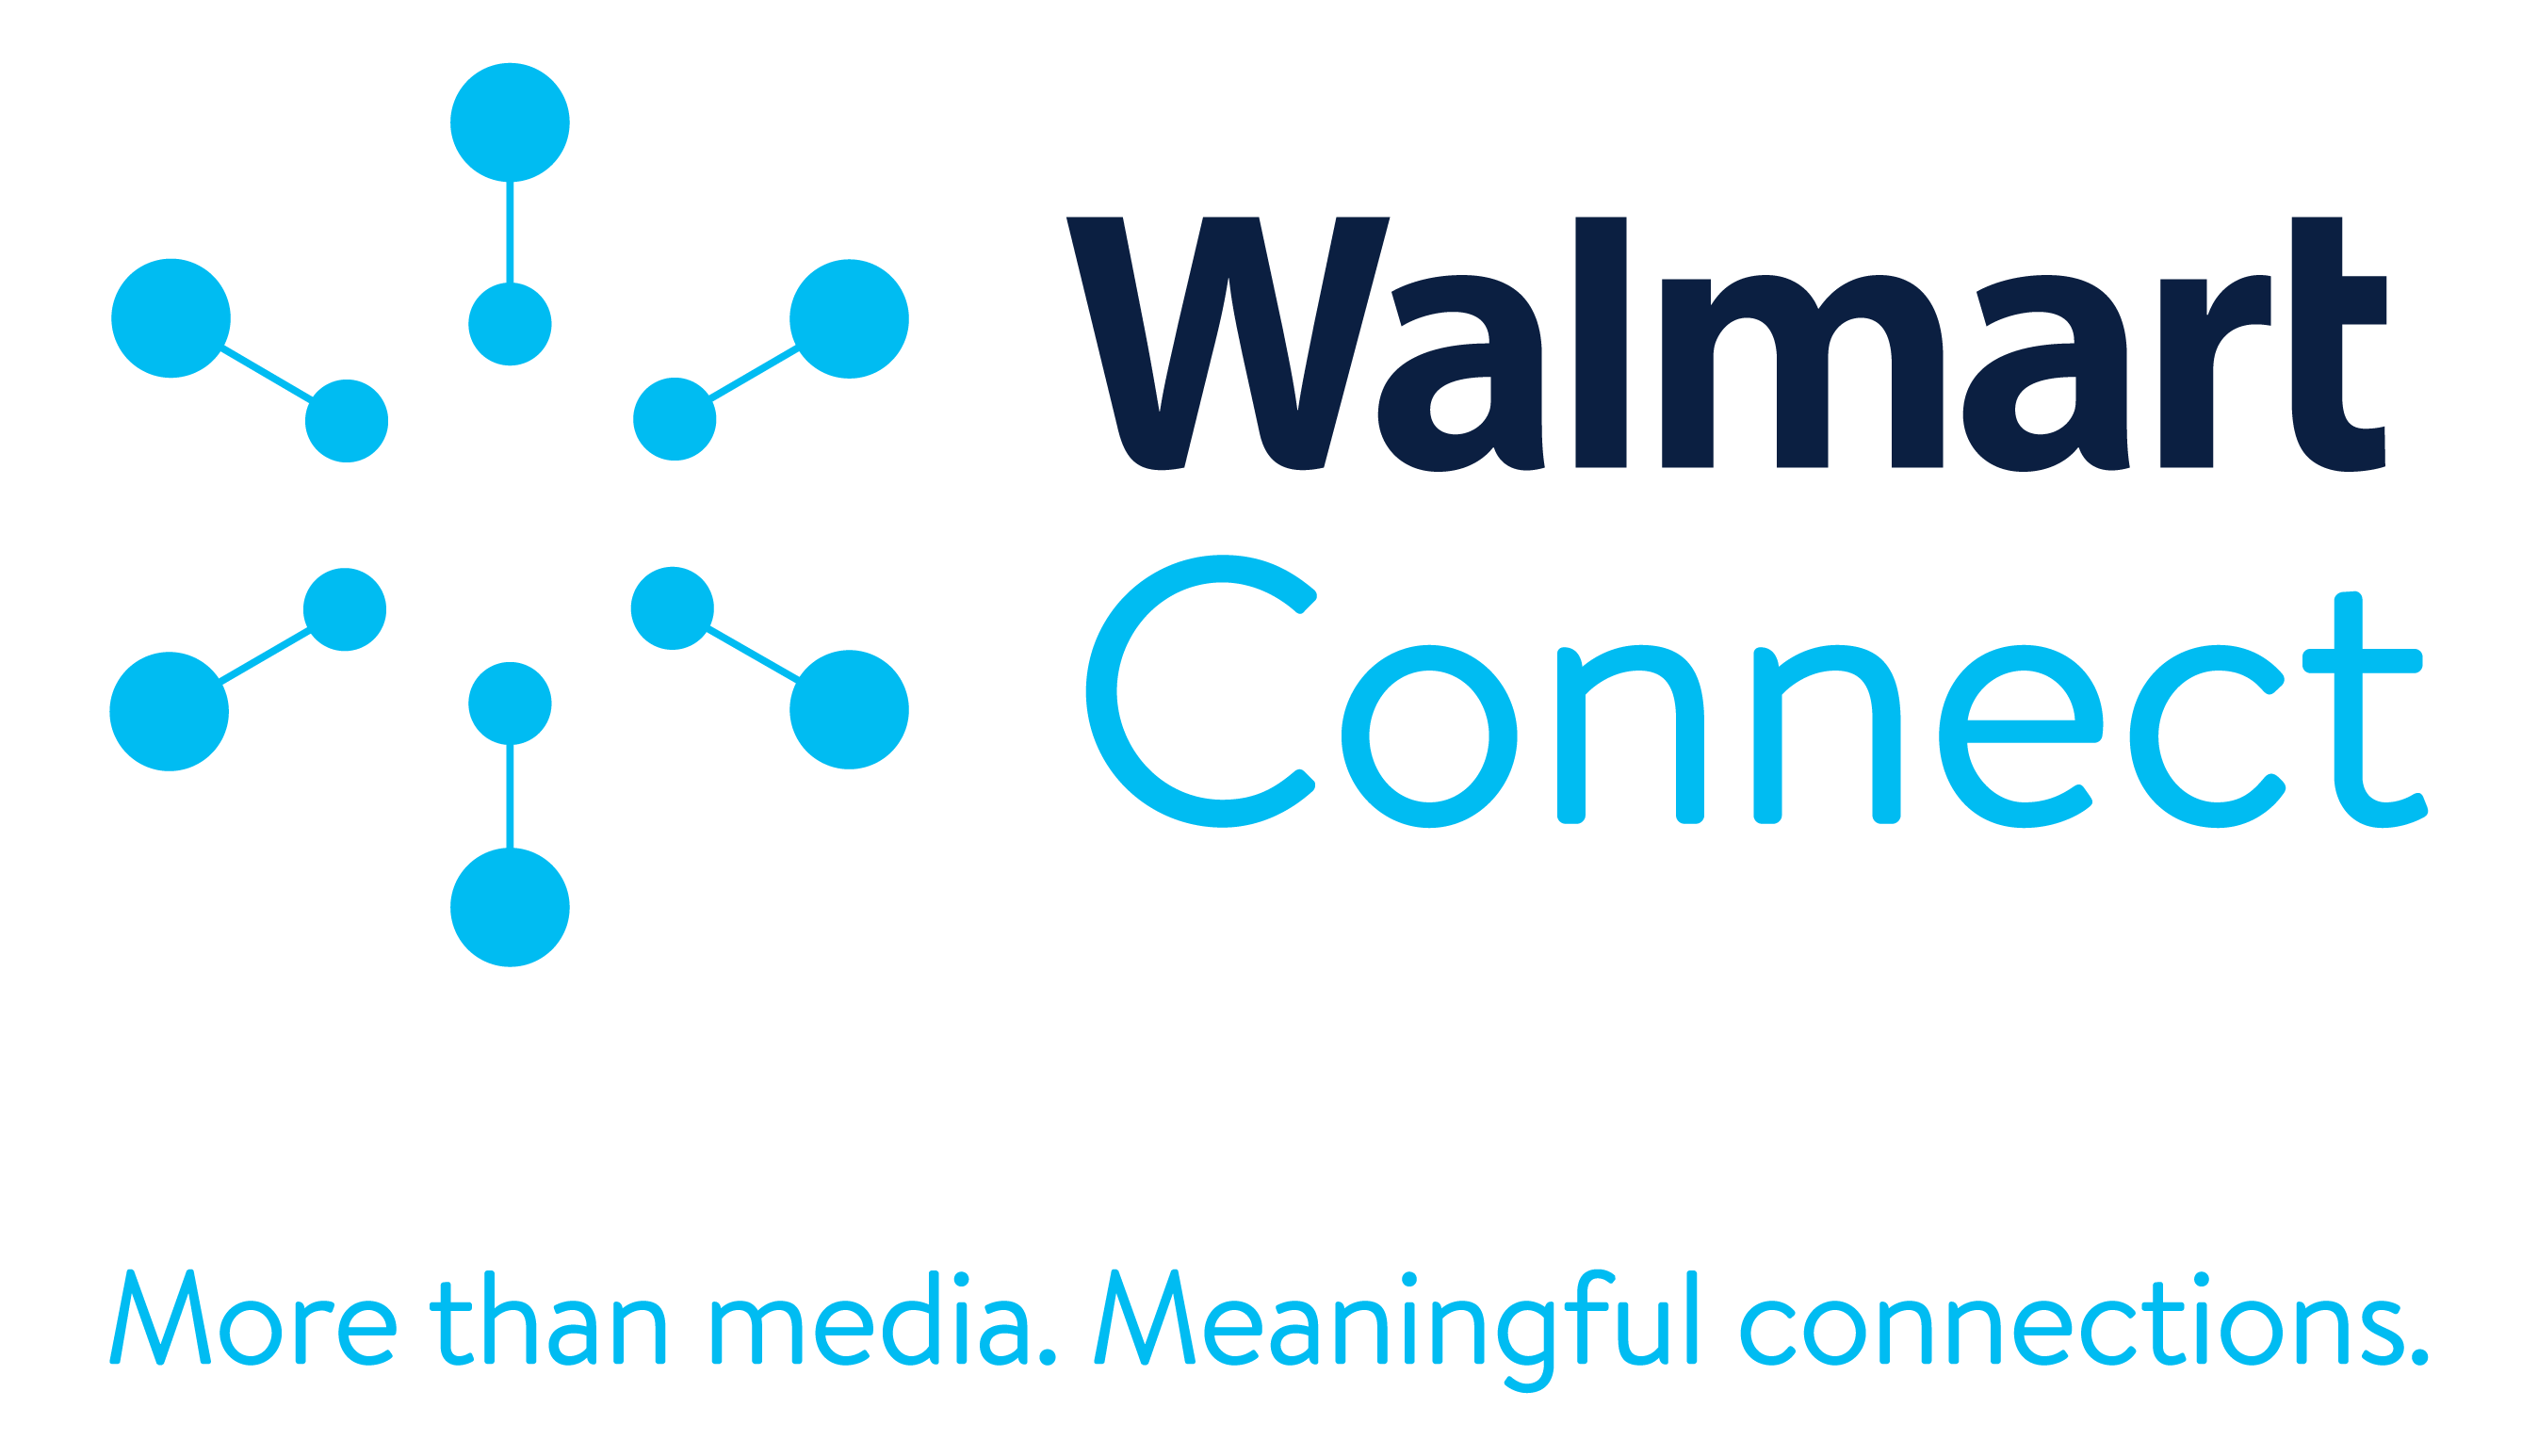 Walmart now selling ads in DOOH screens, digital retail ads, and offering data integrations